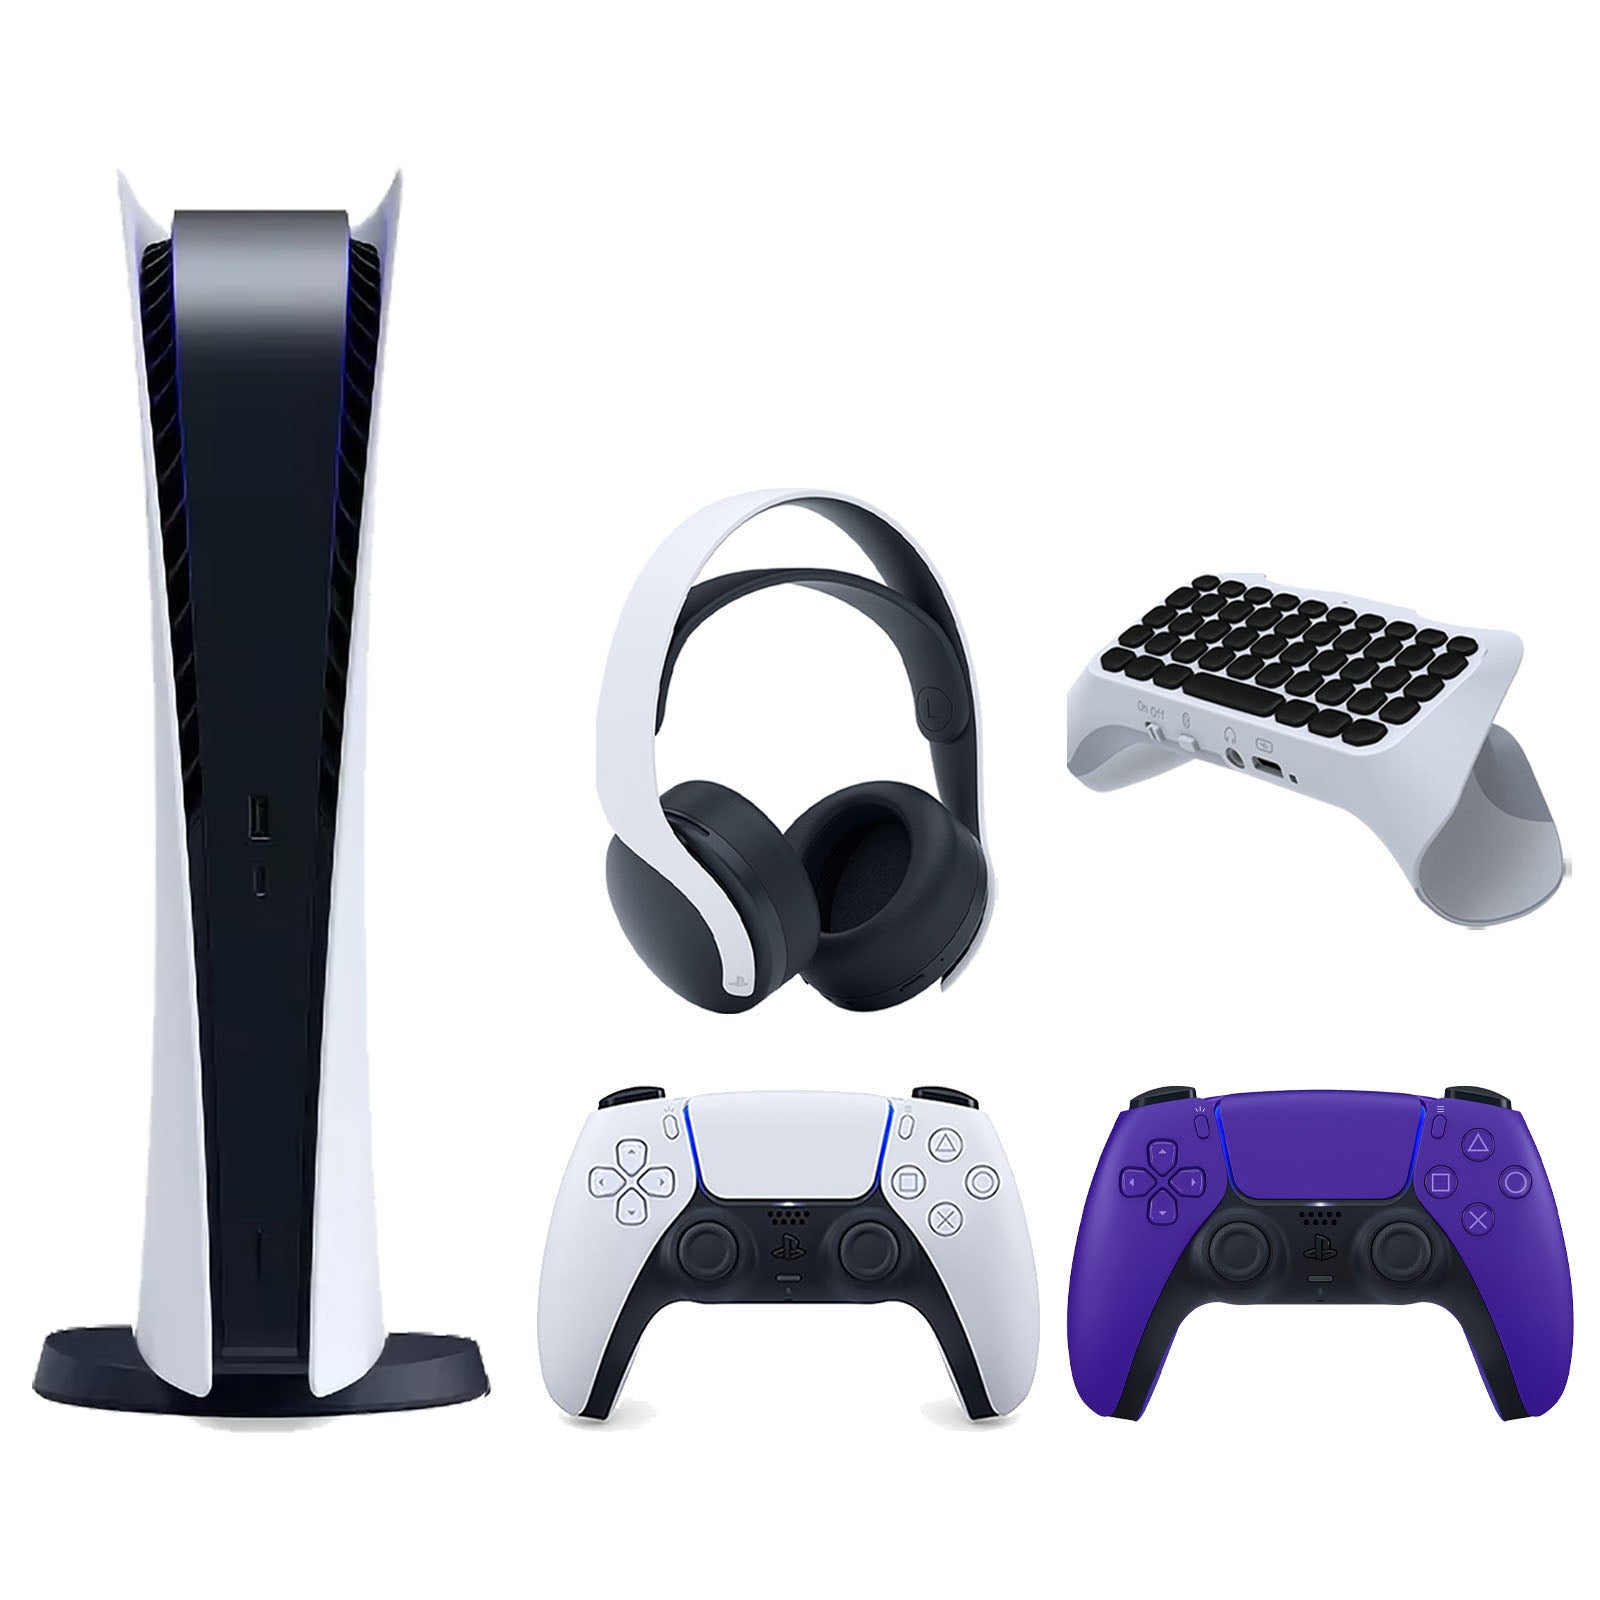 Sony Playstation 5 Digital Edition Console with Extra Purple Controller, White PULSE 3D Headset and Surge QuickType 2.0 Wireless PS5 Controller Keypad Bundle - Pro-Distributing